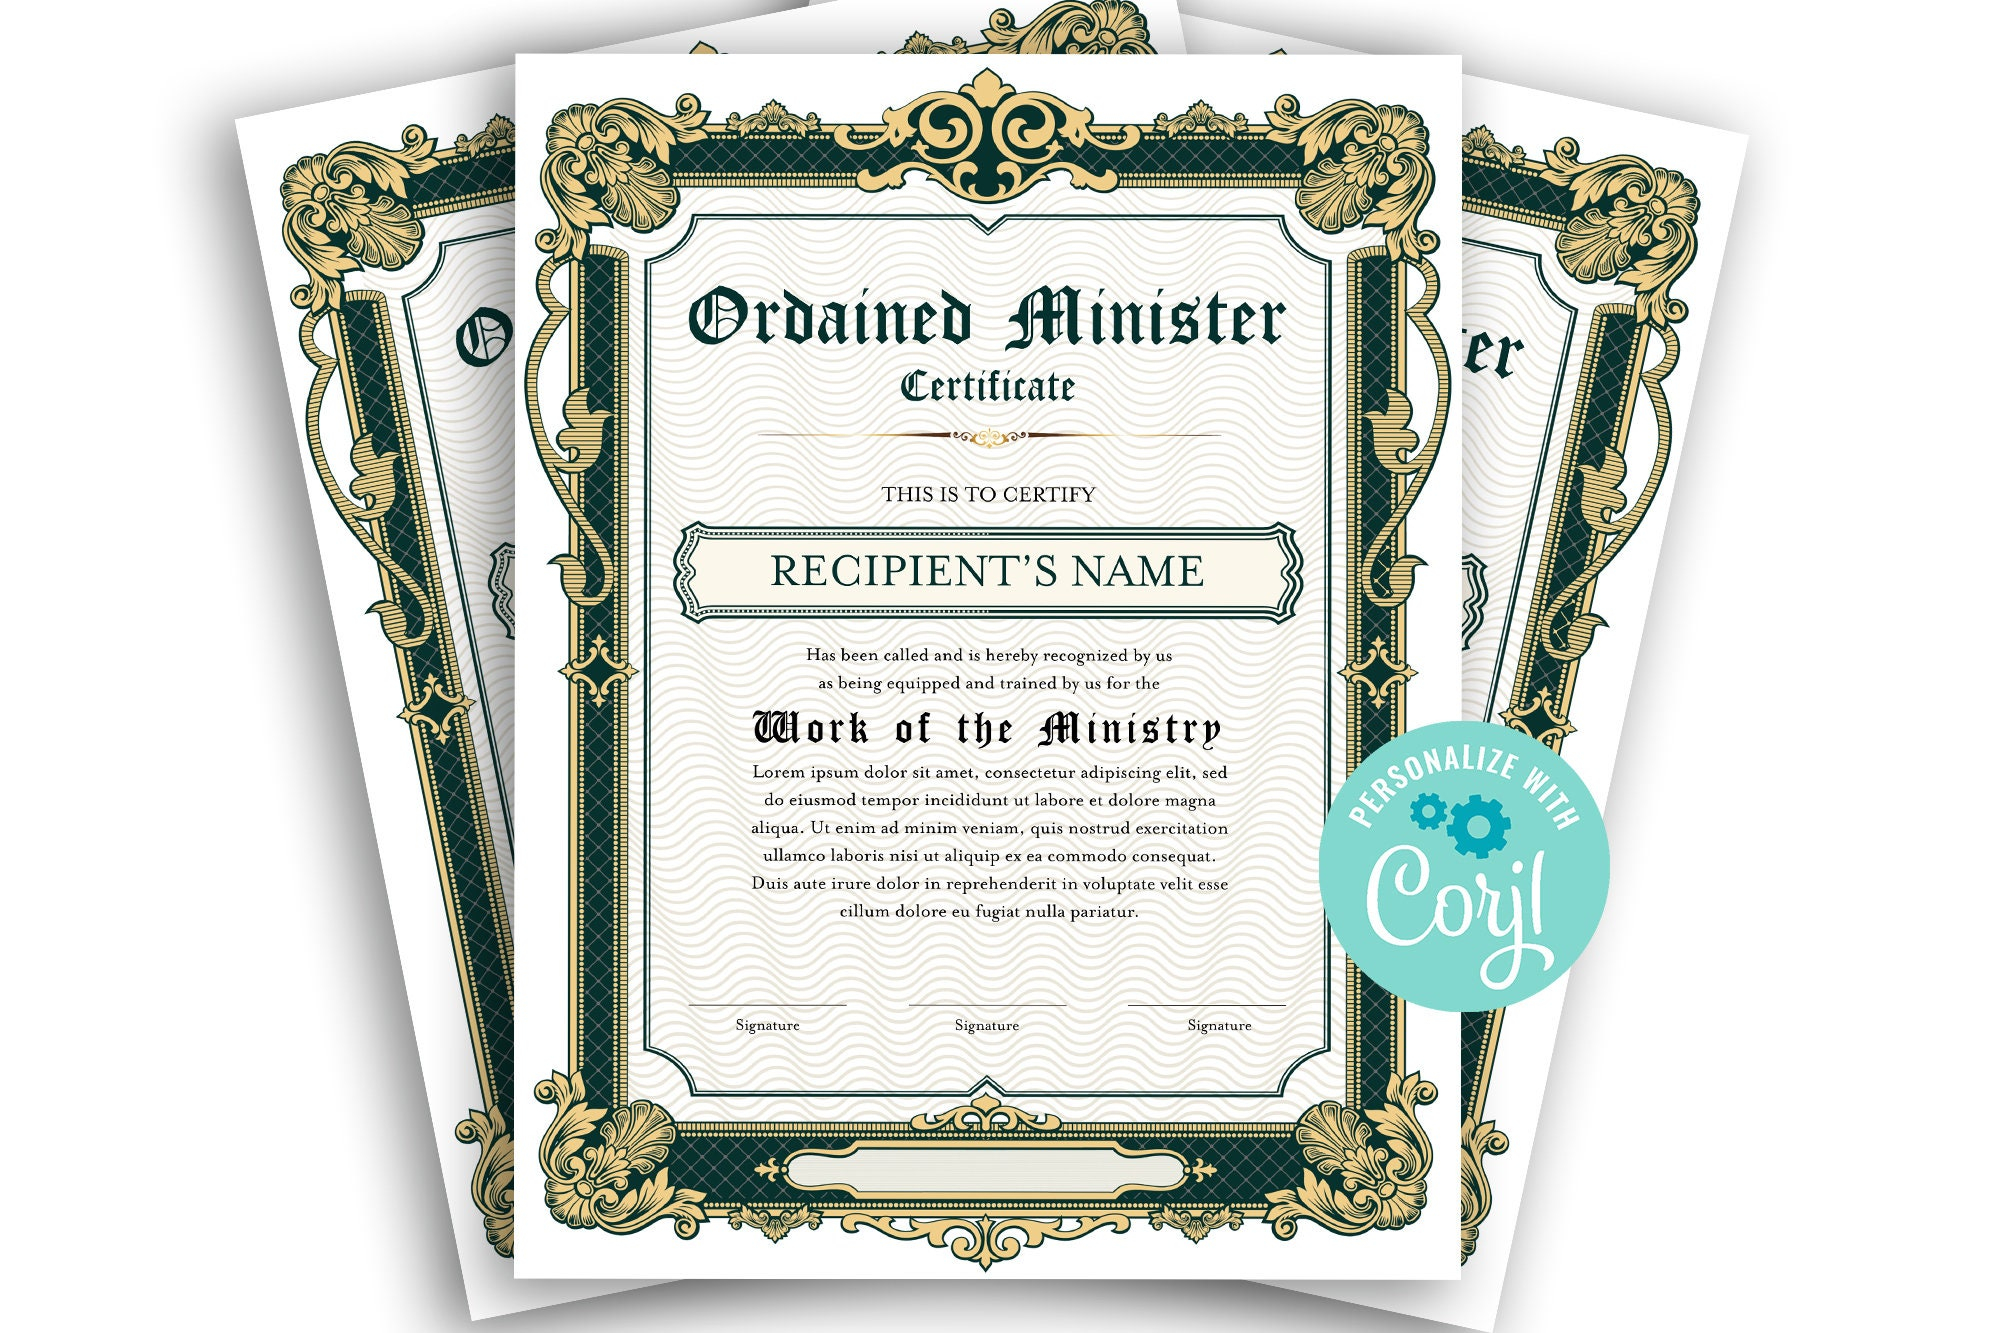 Certificate Of Ordination Minister Editable Template Portrait – Etsy Intended For Certificate Of Ordination Template